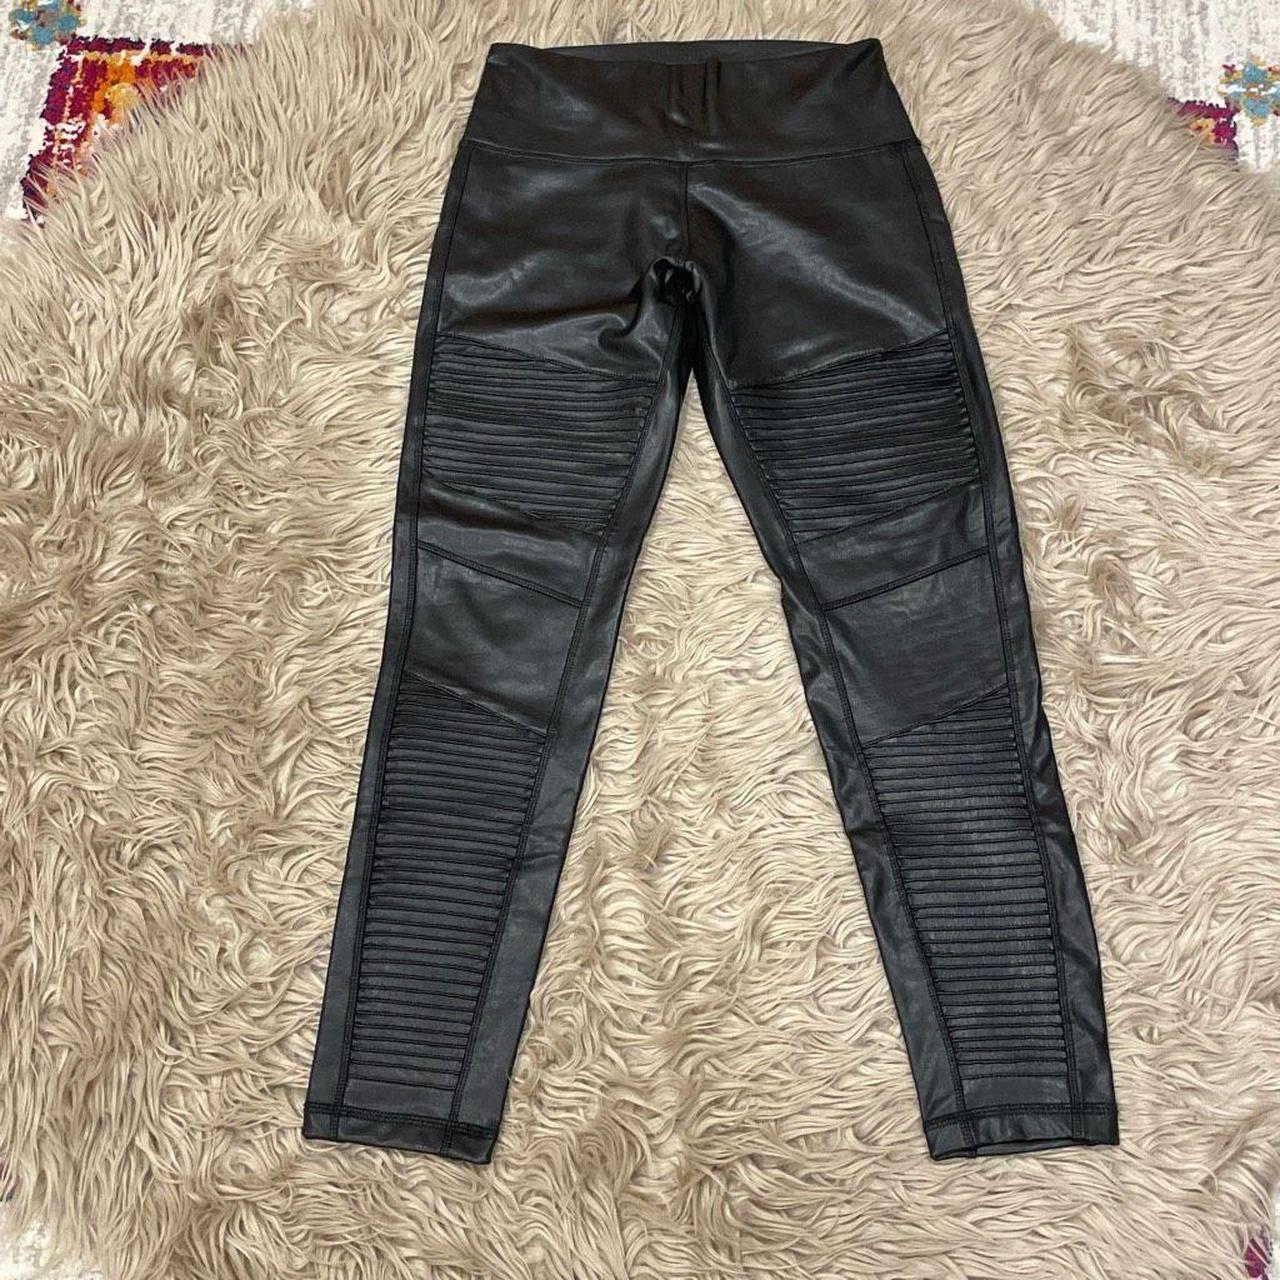 7 for all mankind faux leather leggings. Size